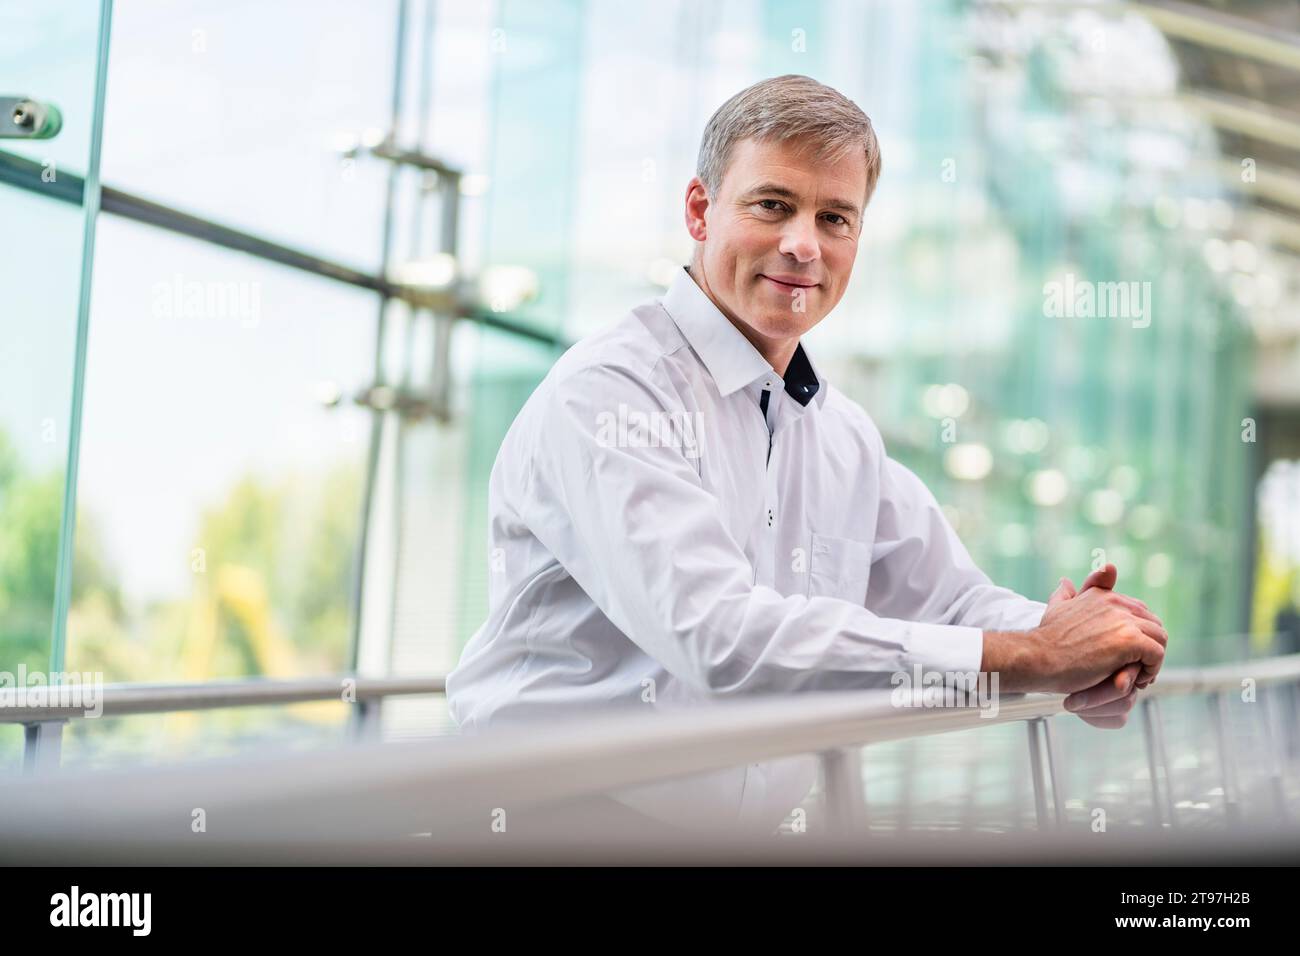 Confident businessman leaning on railing in office building Stock Photo